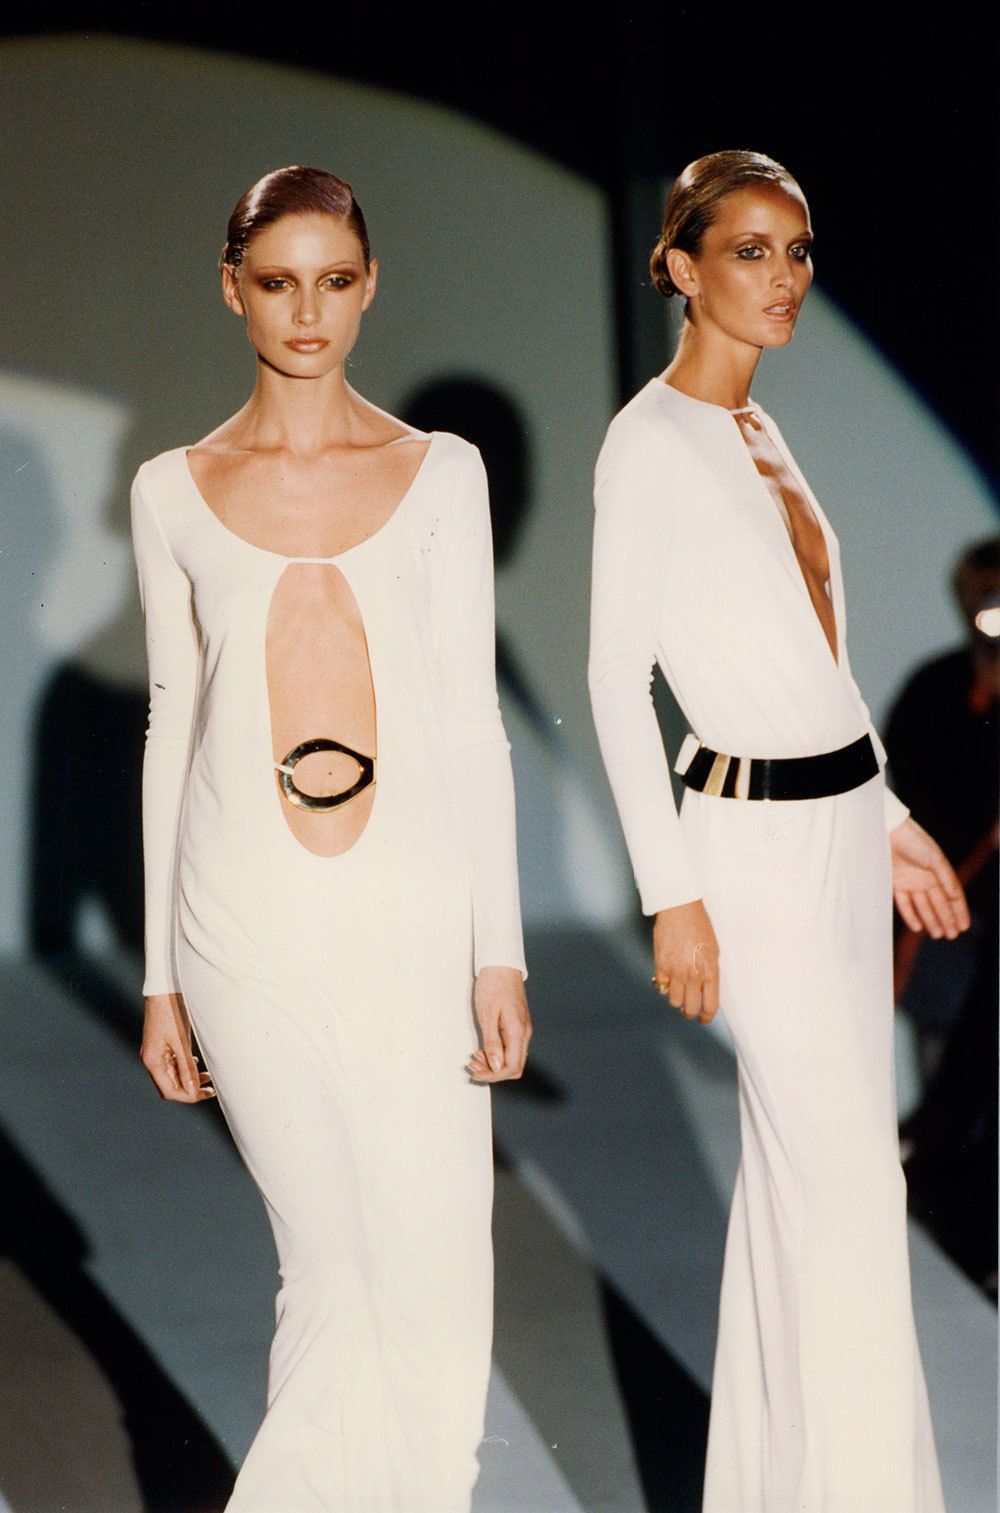 Throwback Thursday: Tom Ford for Gucci